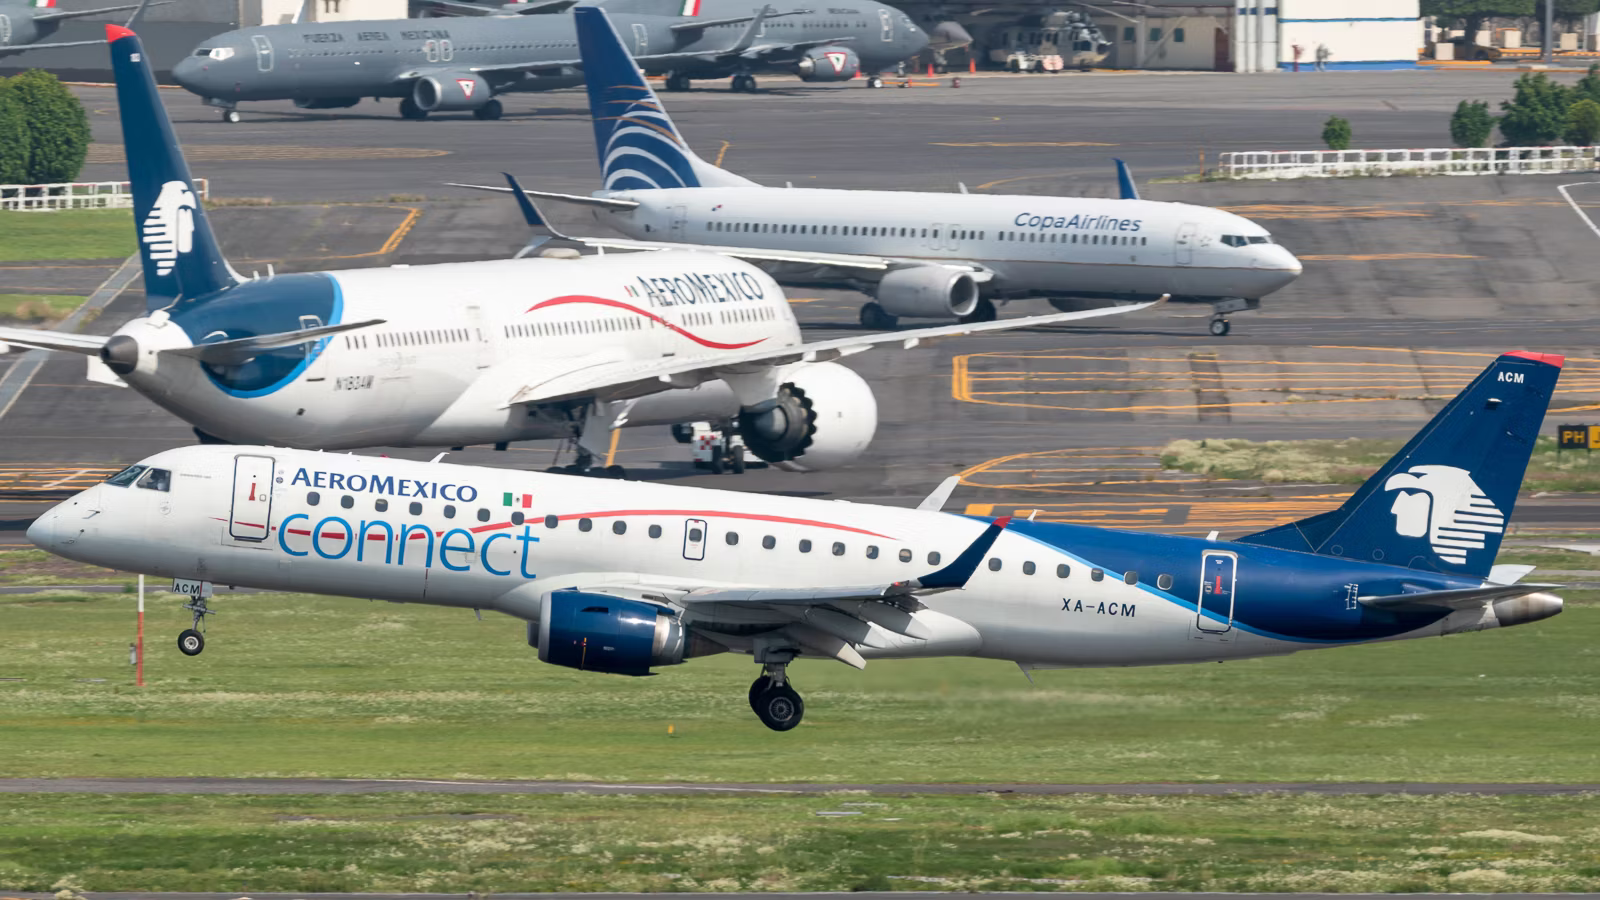 An Aeroméxico Connect Embraer ERJ-190-100LR flying in front of Aeroméxico and CopaAirlines aircraft.